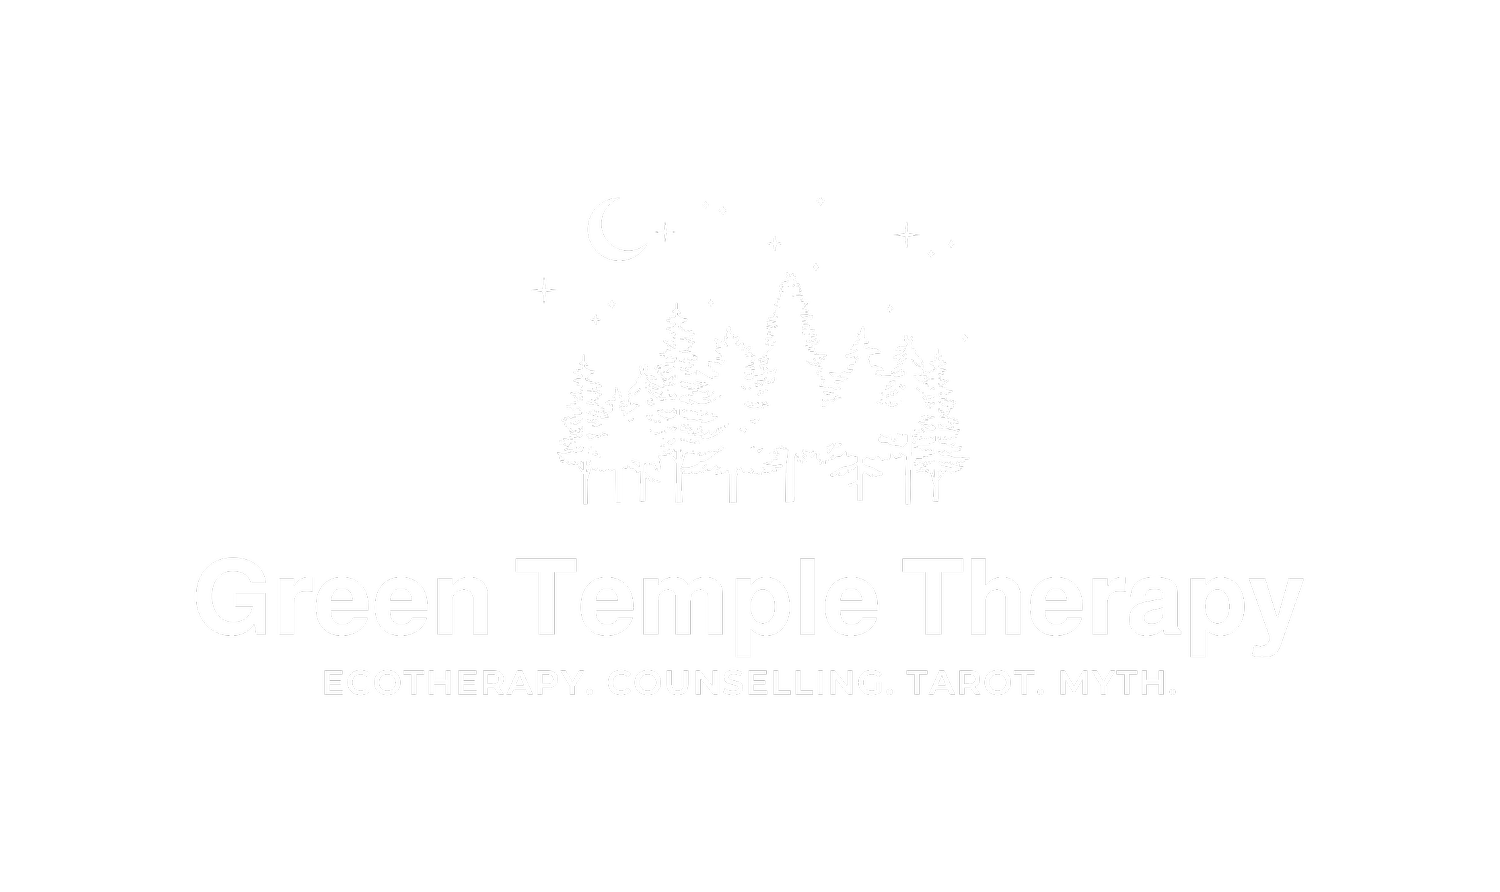 Green Temple Therapy